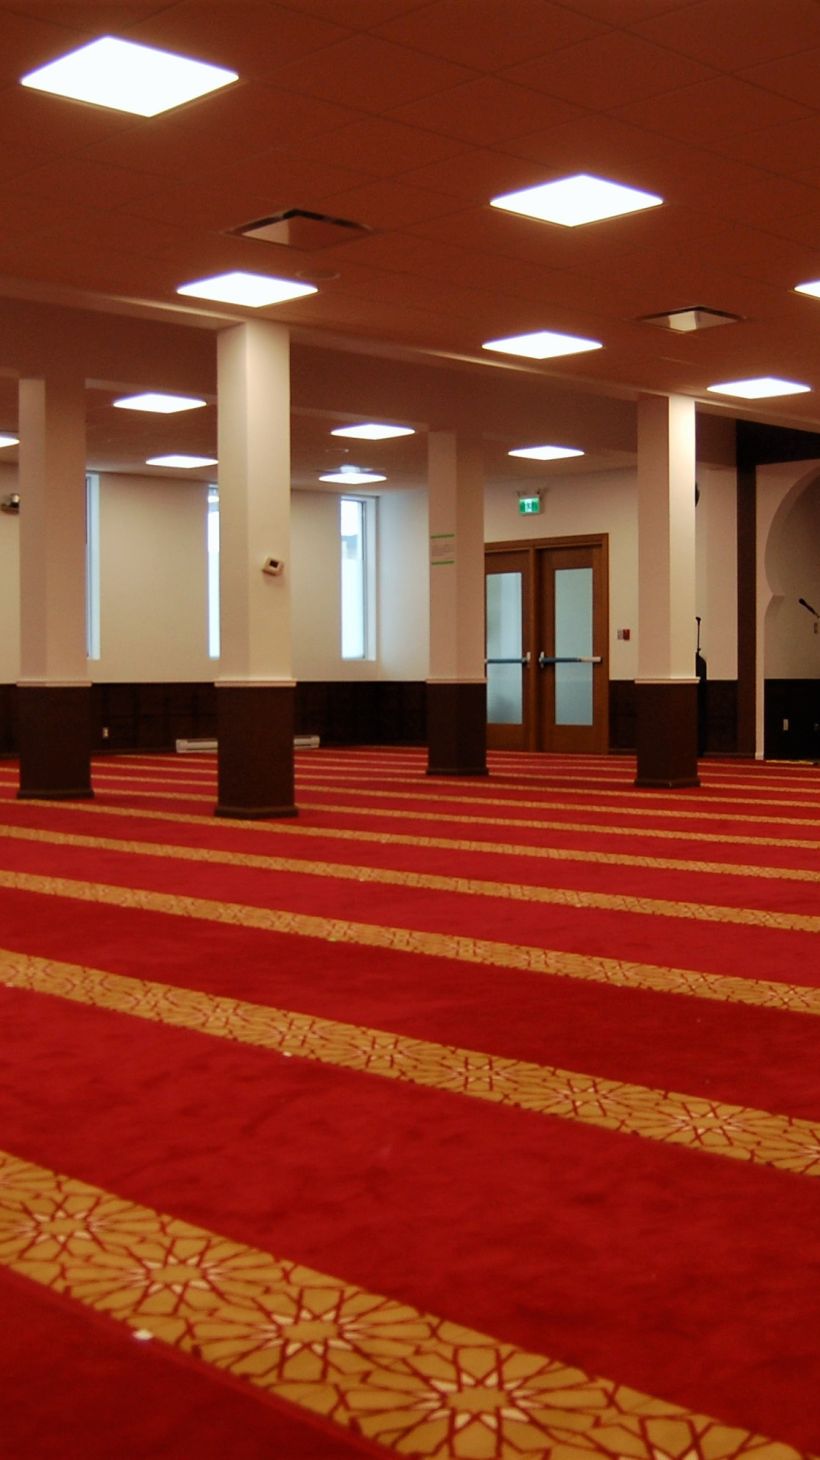 The main prayer room at the Quebec Islamic Cultural Centre is pictured